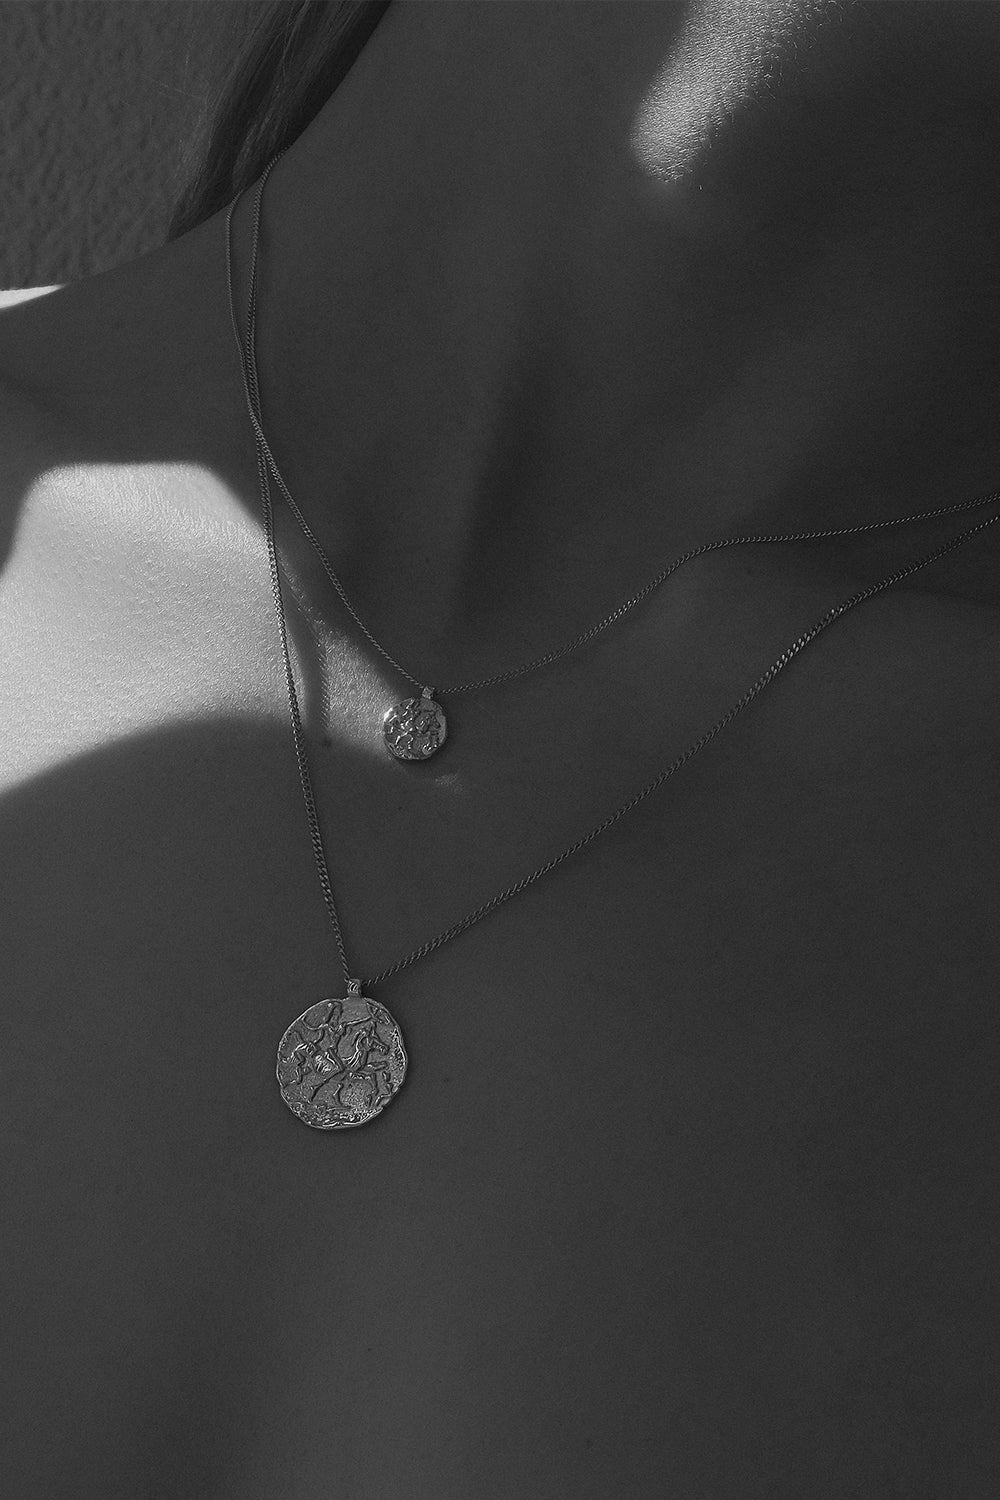 Mini Coin Necklace | Silver or 9K White Gold, More Options Available